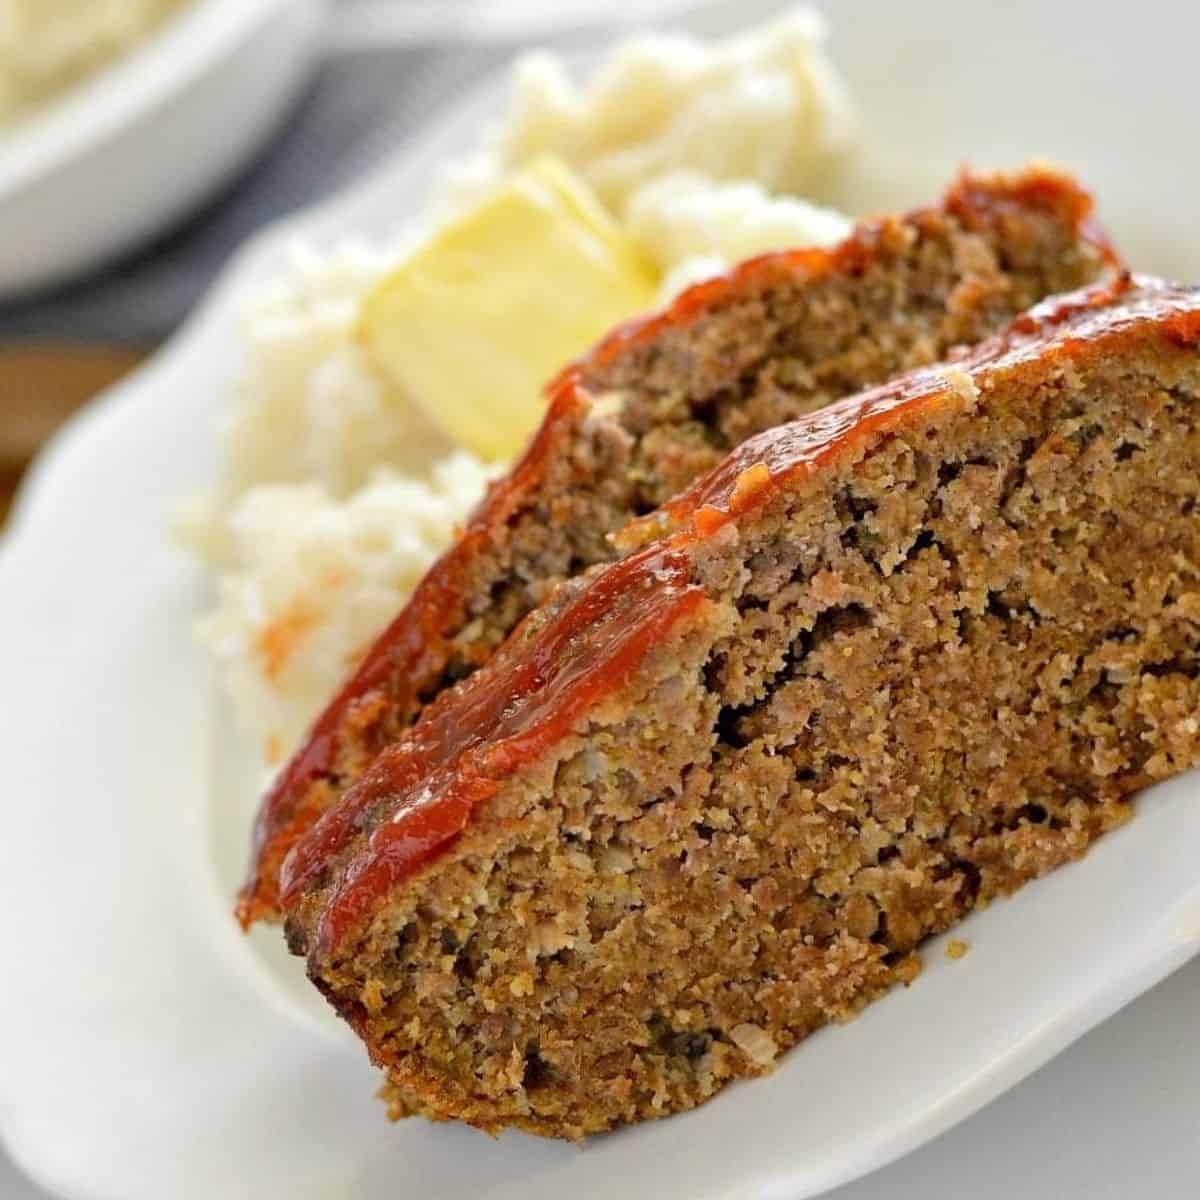 BBQ Turkey Meatloaf with Oatmeal - Gluten-Free!